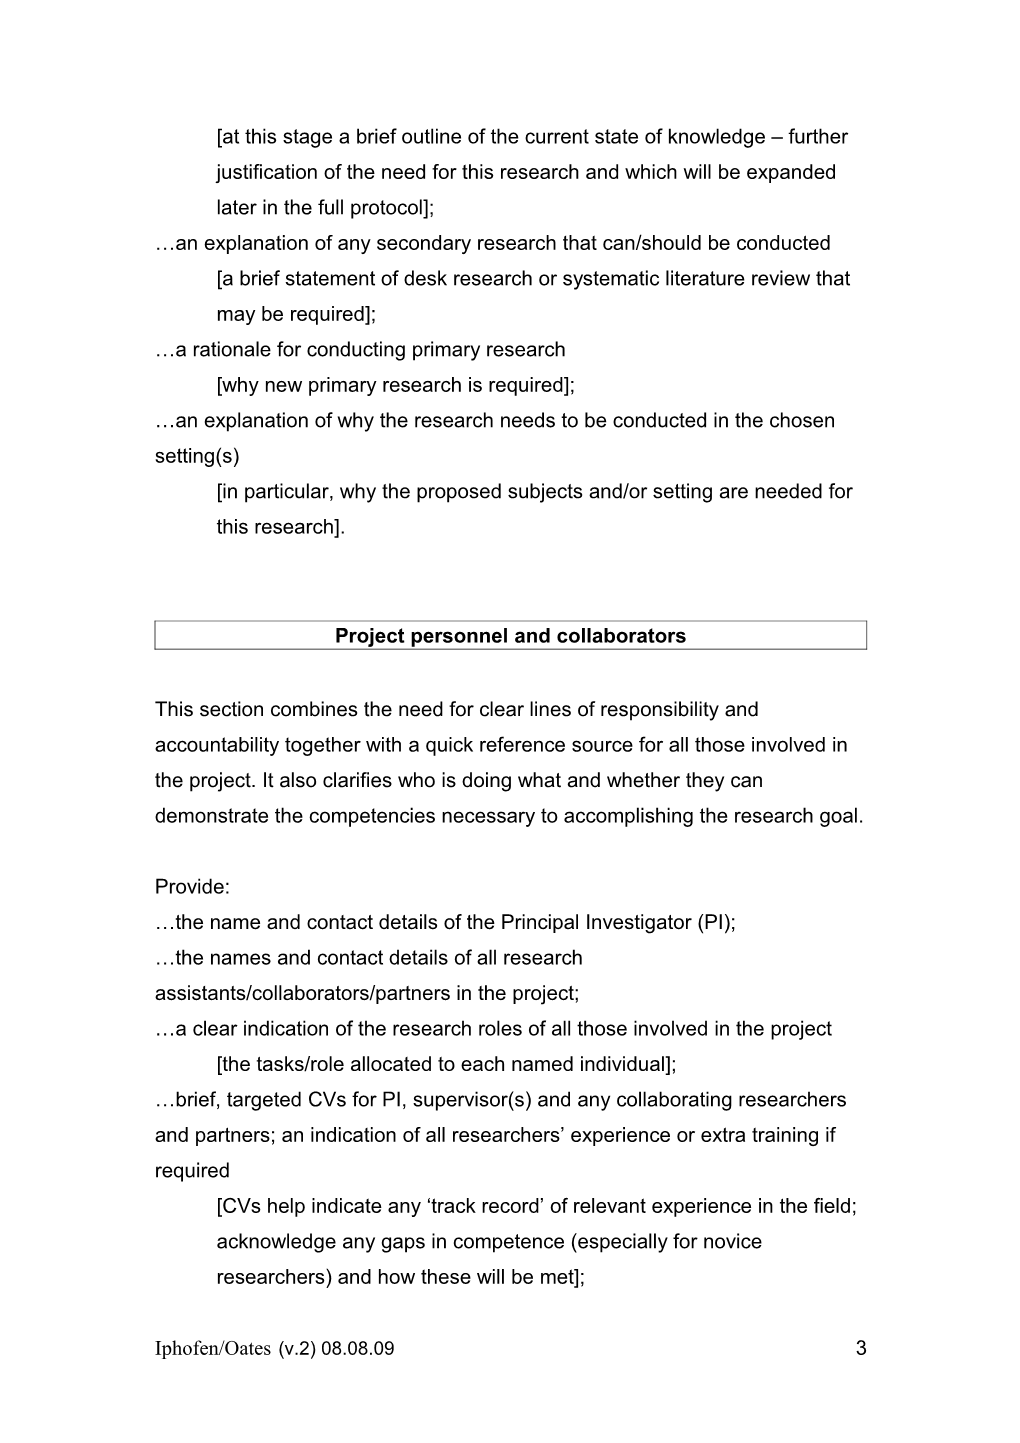 Writing a Research Project Proposal (Generic Template)